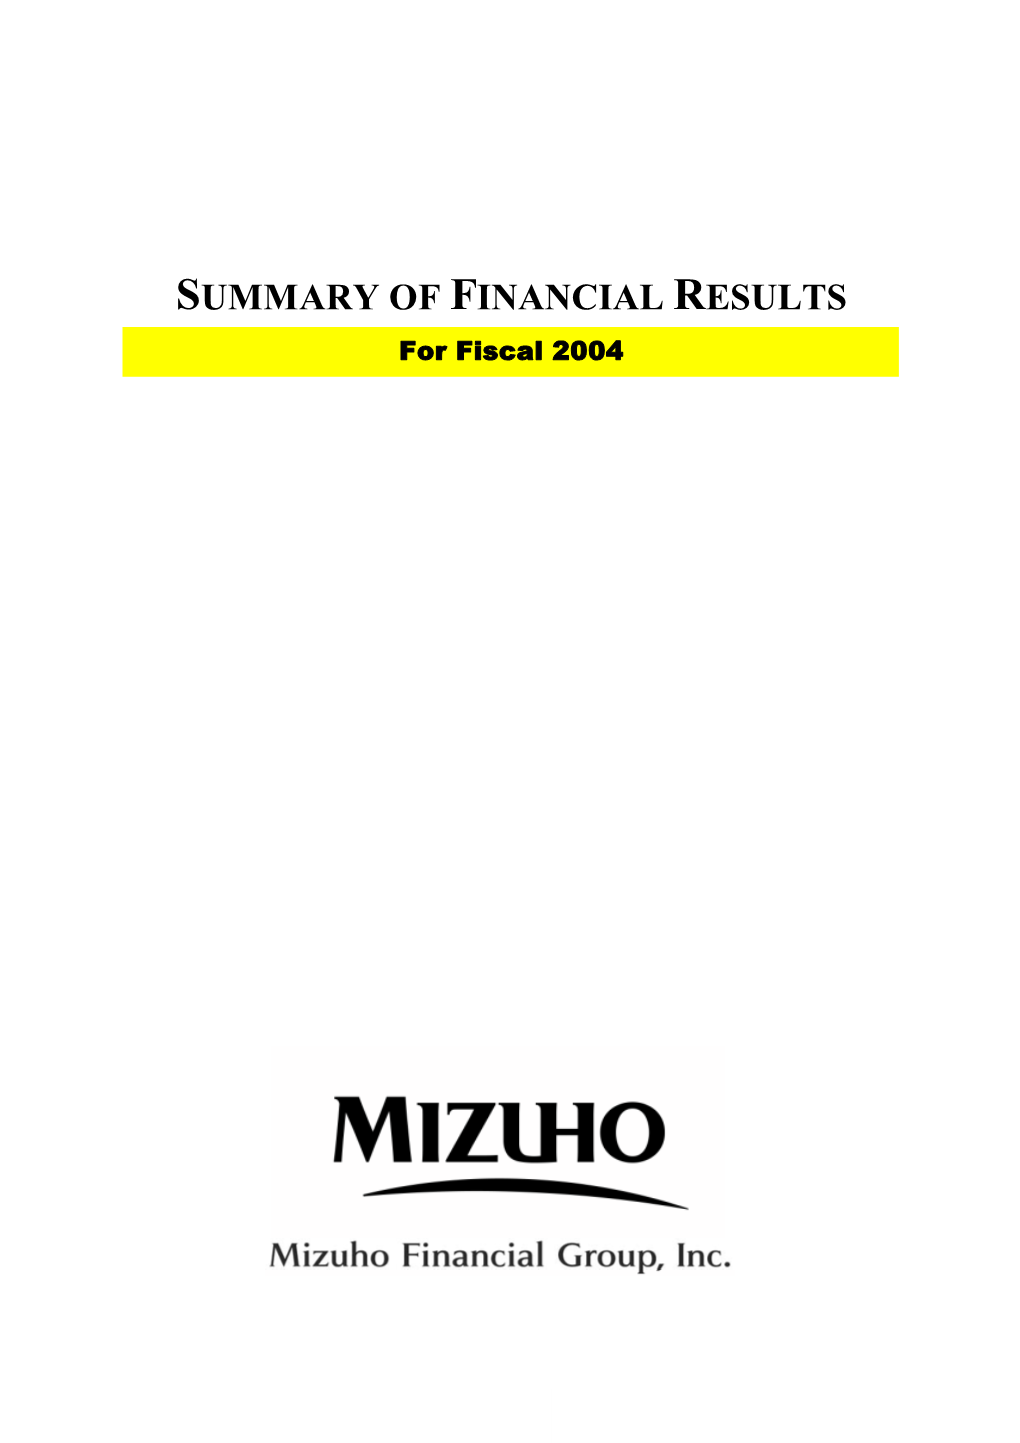 Summary of Financial Results for Fiscal 2004